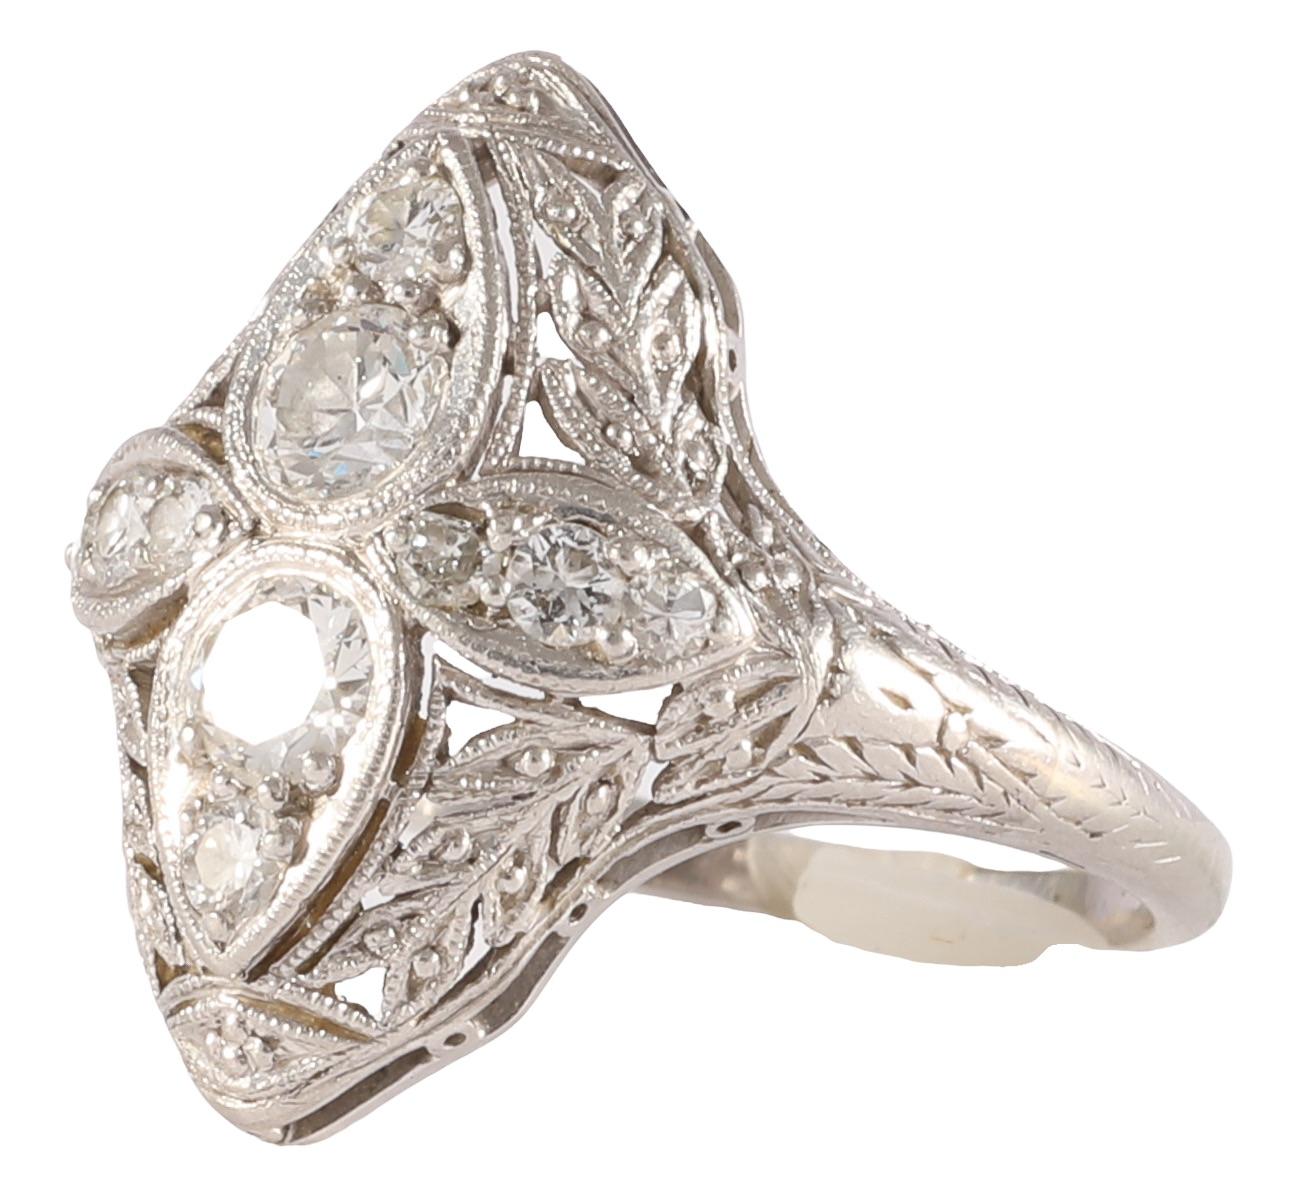 Art Deco diamond platinum ring that features near colorless Old European diamonds and a beautiful floral engraving. The elongated shape offer more finger coverage than expected with a less than one carat diamond ring. Timeless elegance in a